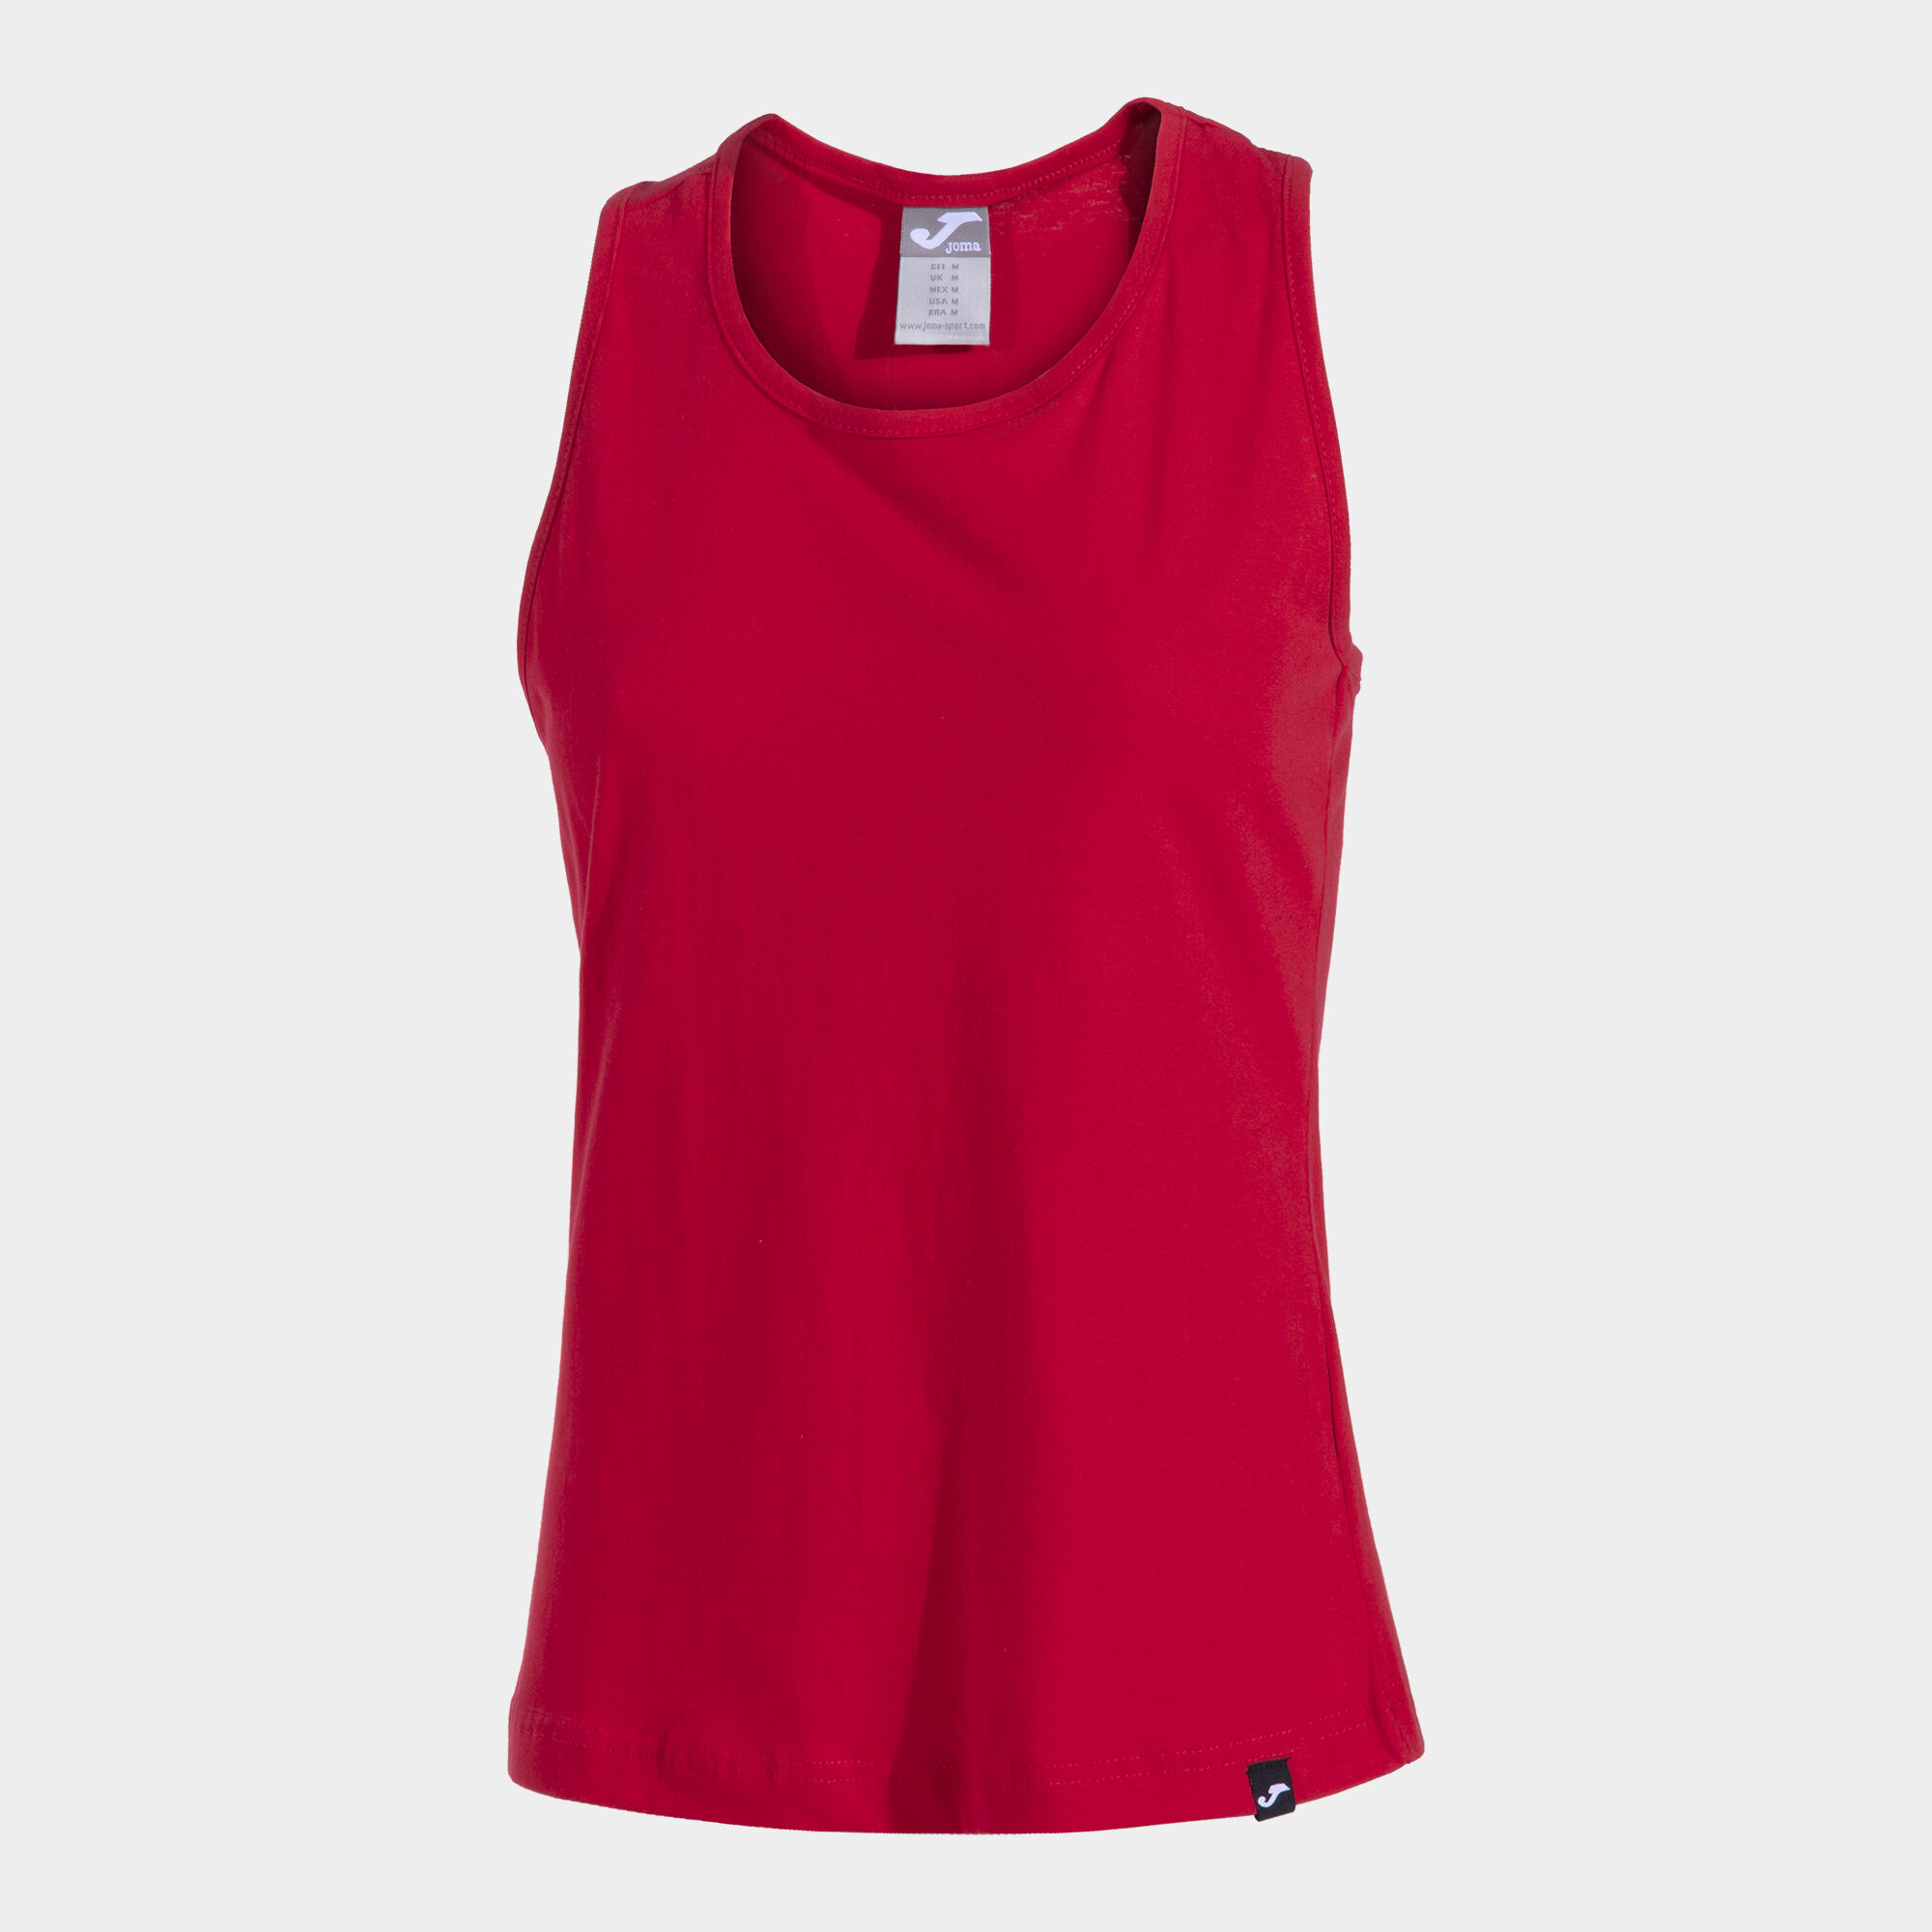 Tank top woman Oasis red